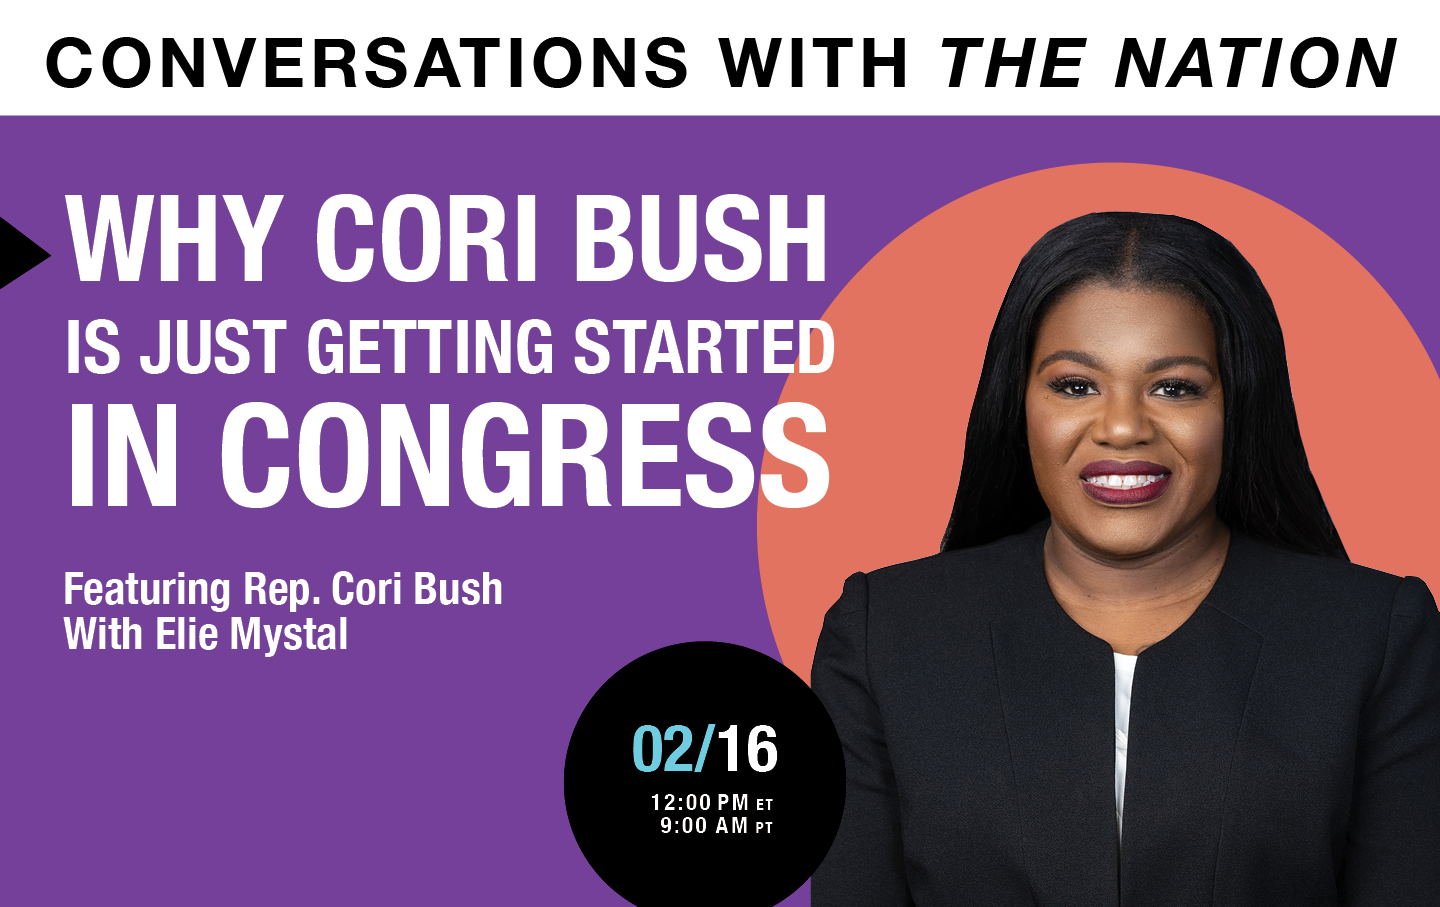 Image for Nation Conversation: Why Cori Bush is Just Getting Started in Congress